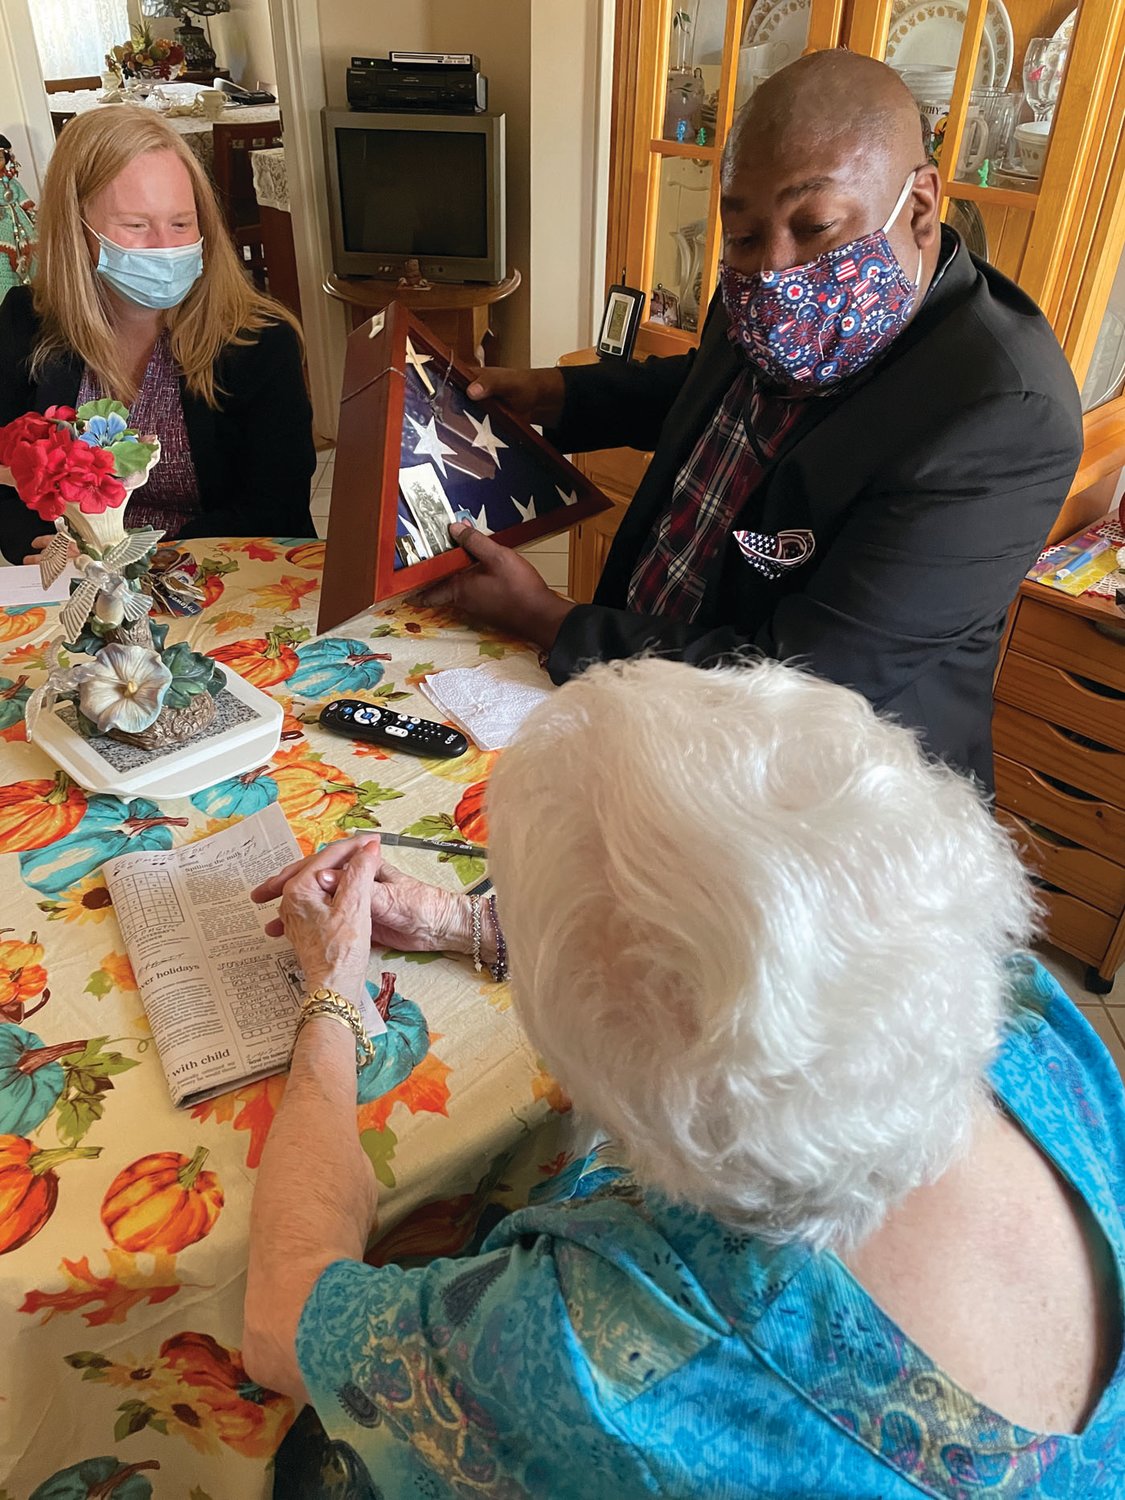 COMING TOGETHER: Theresa Brennan welcomes Meals on Wheels Executive Director Amy Grady and RI Veteran Affairs Director Kasim Yarn to sit around her table. Her late husband, George A. Brennan, served overseas during WWII.